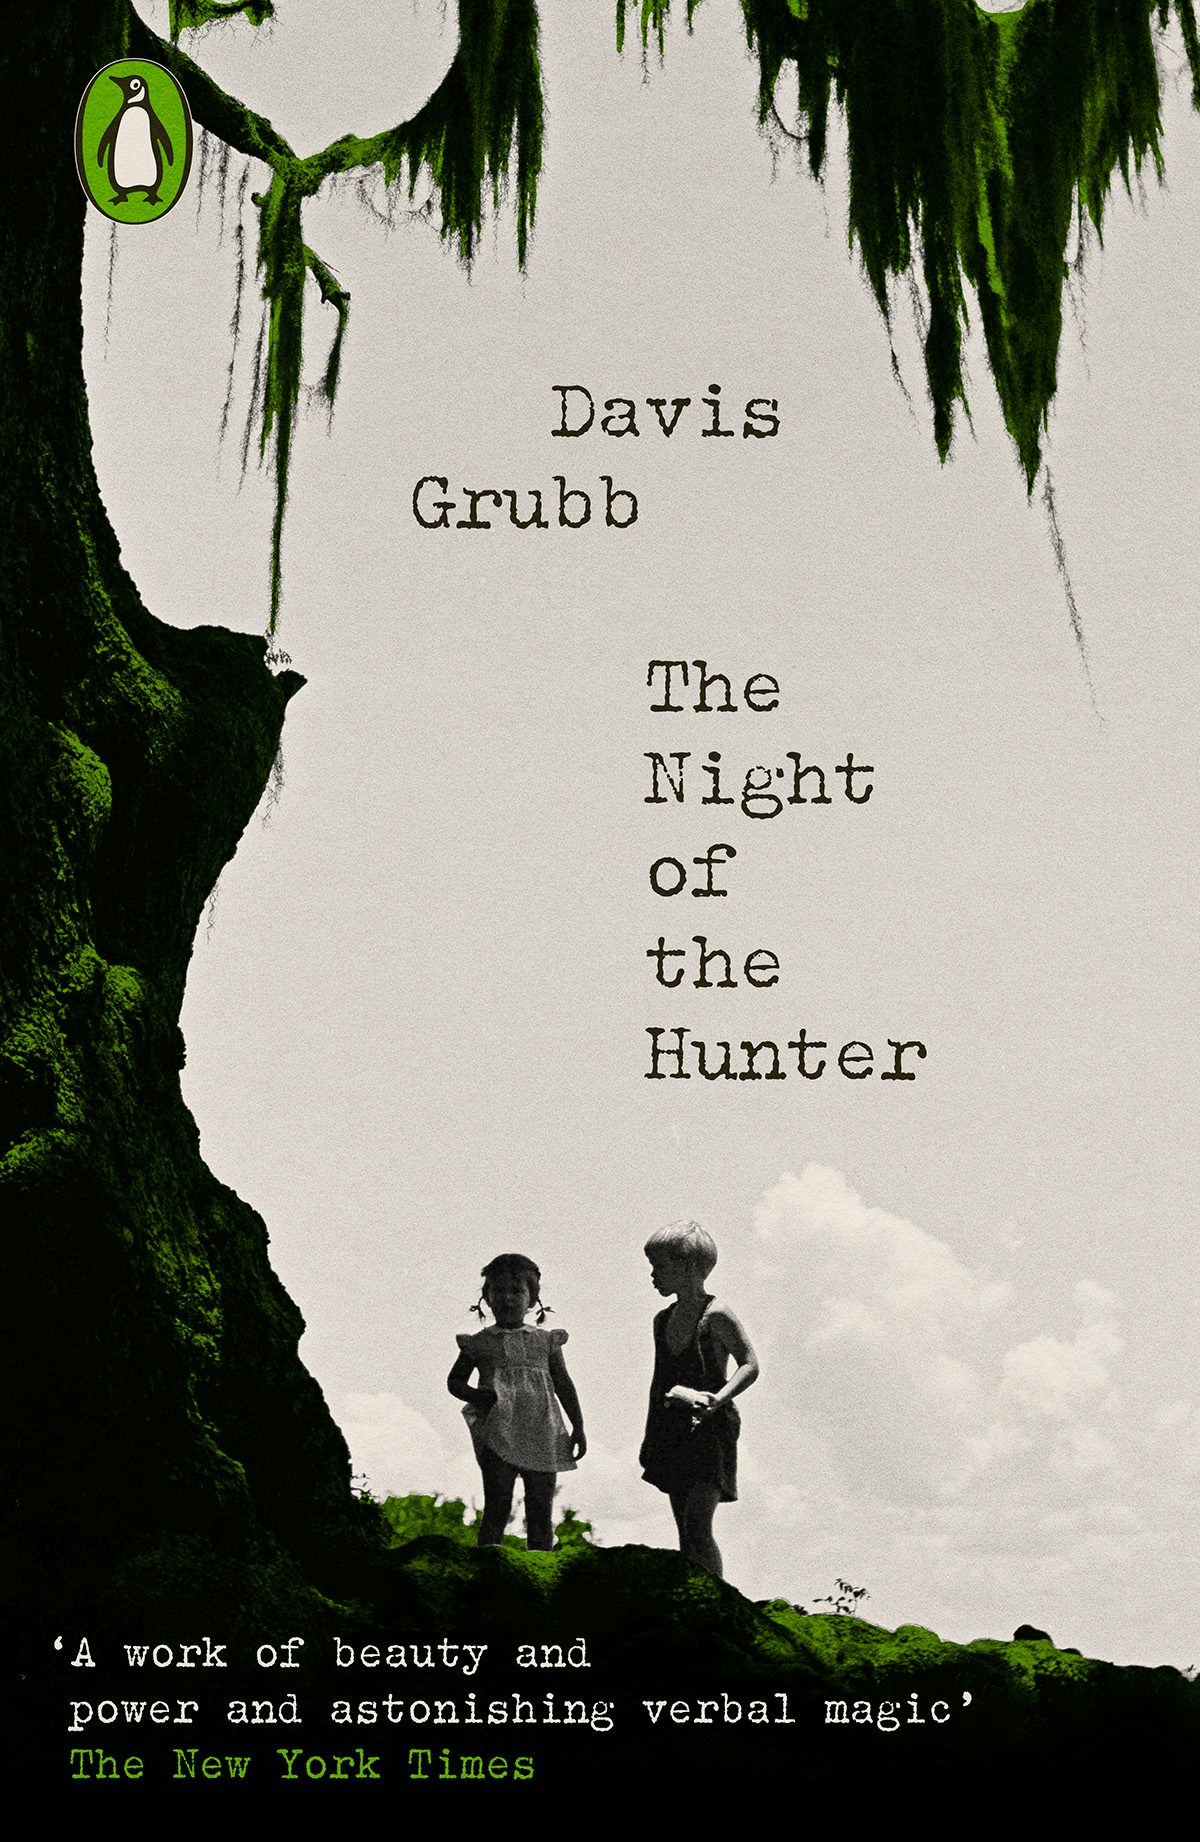 Image shows the cover of The Night of the Hunter from Penguin Modern Classics Crime and Espionage series, showing an illustration of a tree arching over two young people